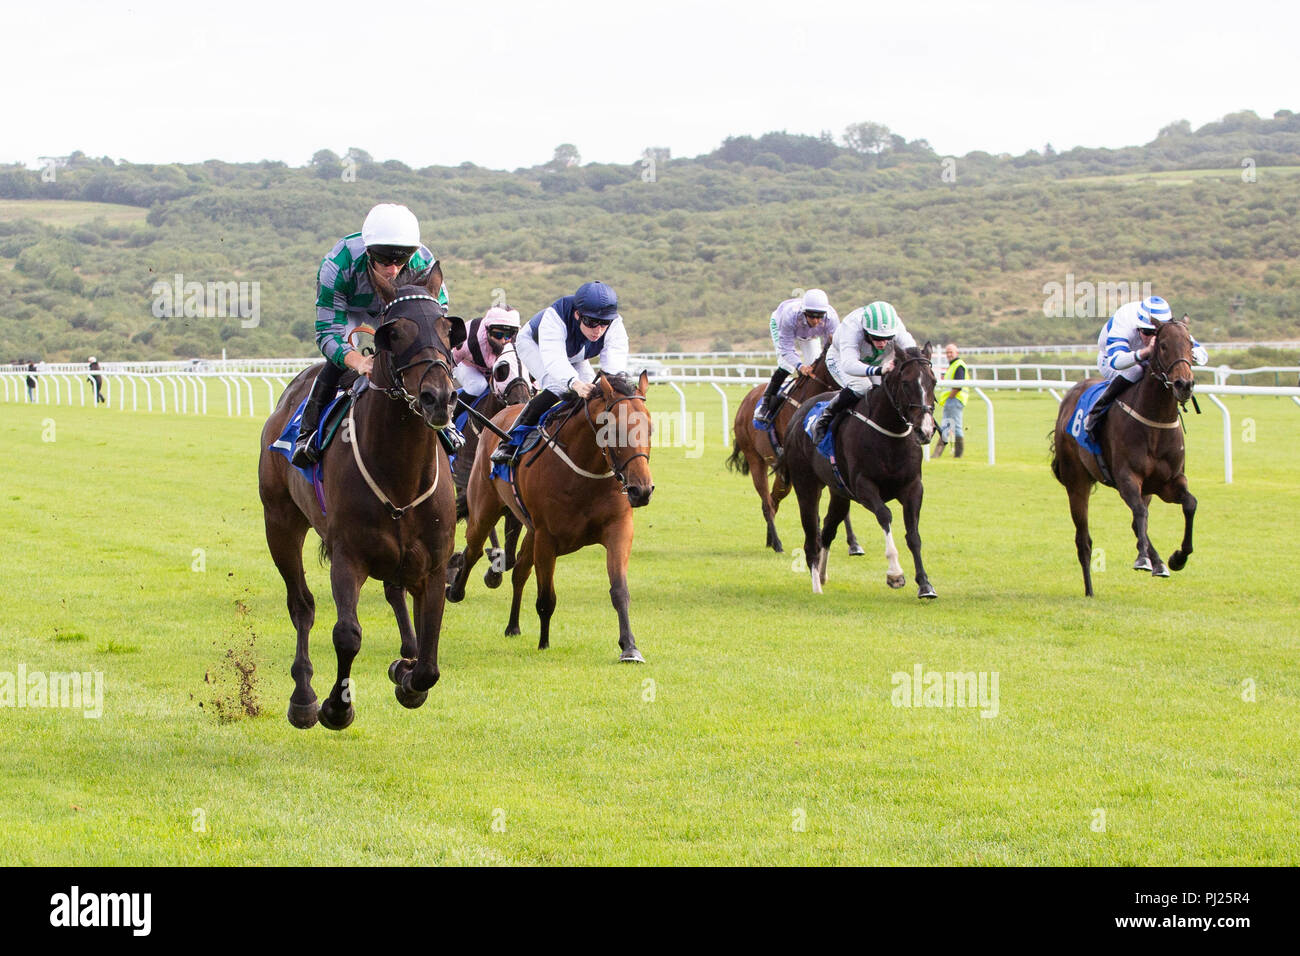 Racehorse Captain Lars (L) ridden by jockey Edward Greatrex on the way to winning a race at Ffos Las racecourse Stock Photo